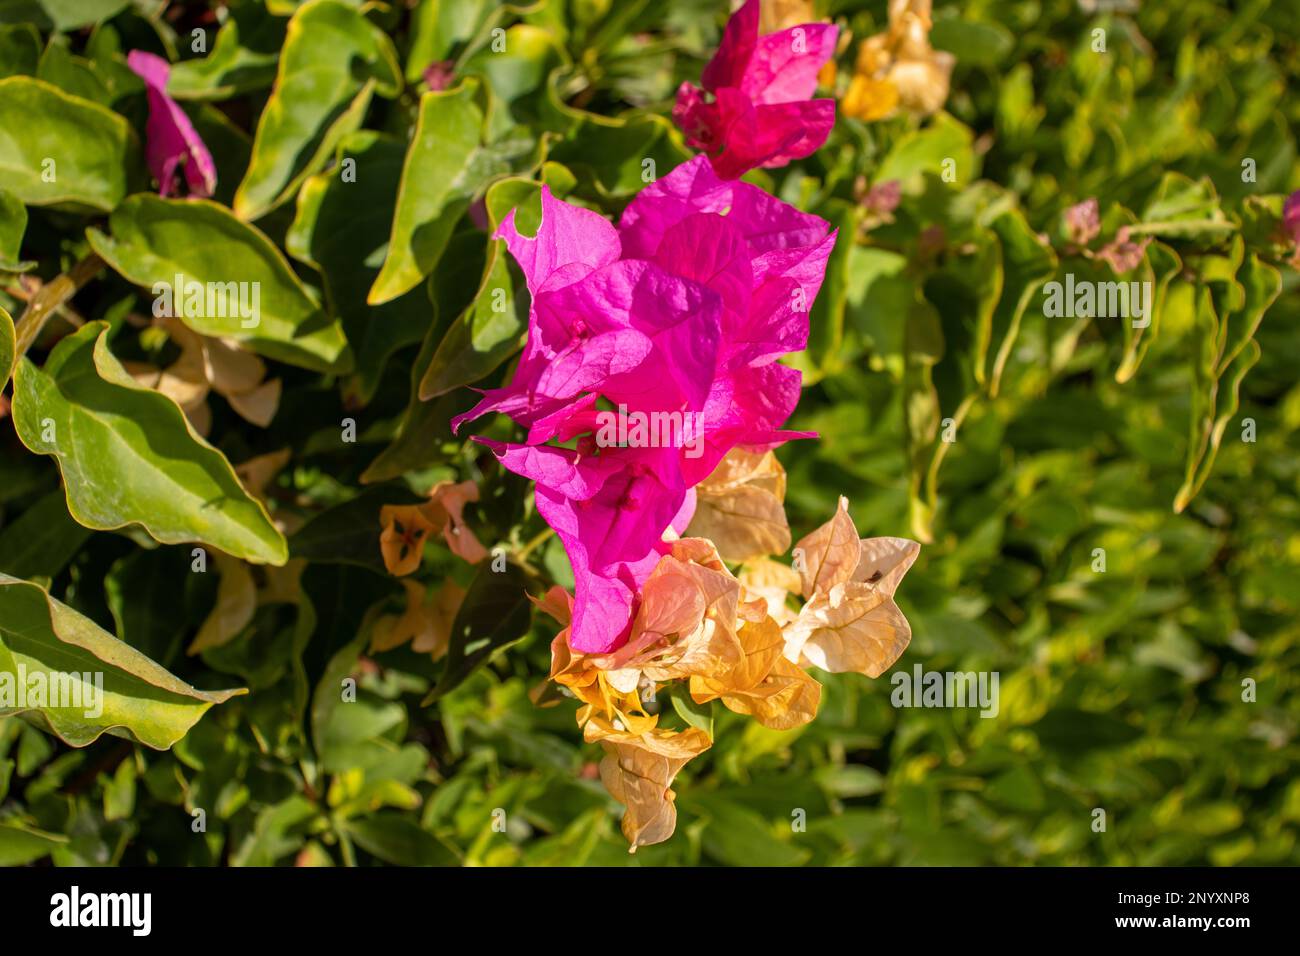 bright pink and orange Bougainvillea flowers with green leaves in the background Stock Photo